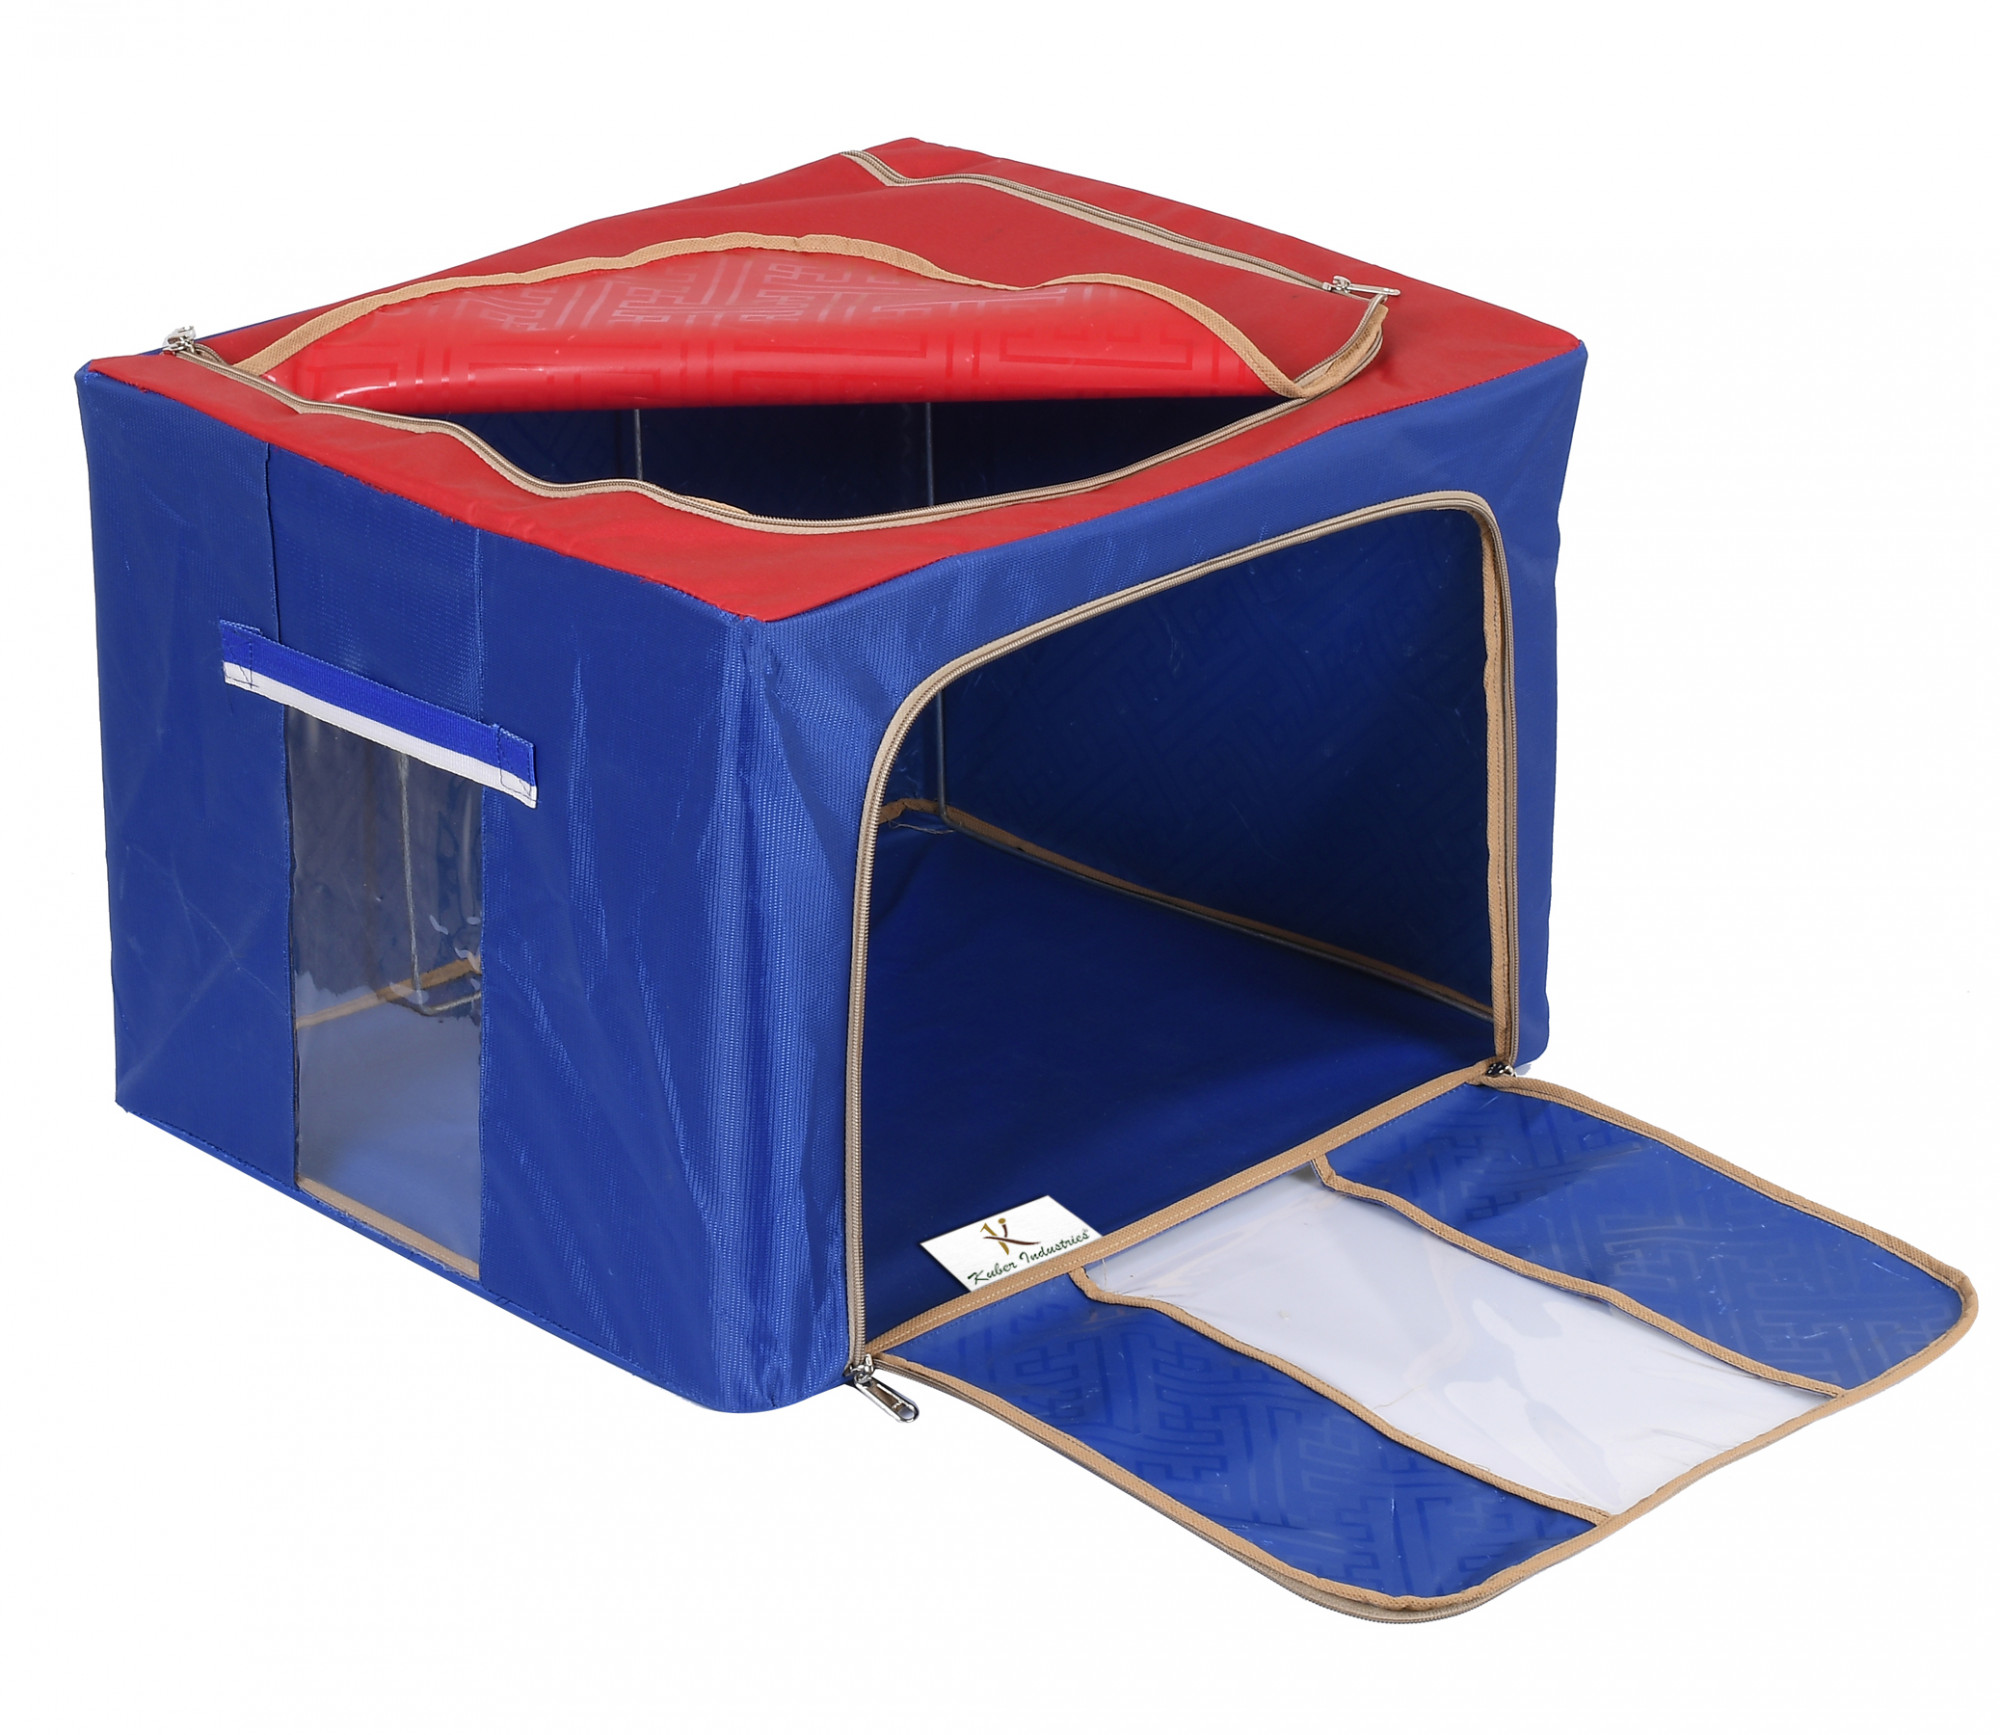 Kuber Industries Steel Frame Storage Box/Organizer For Clothing, Blankets, Bedding With Clear Window, 66Ltr. (Red & Blue)-44KM0309